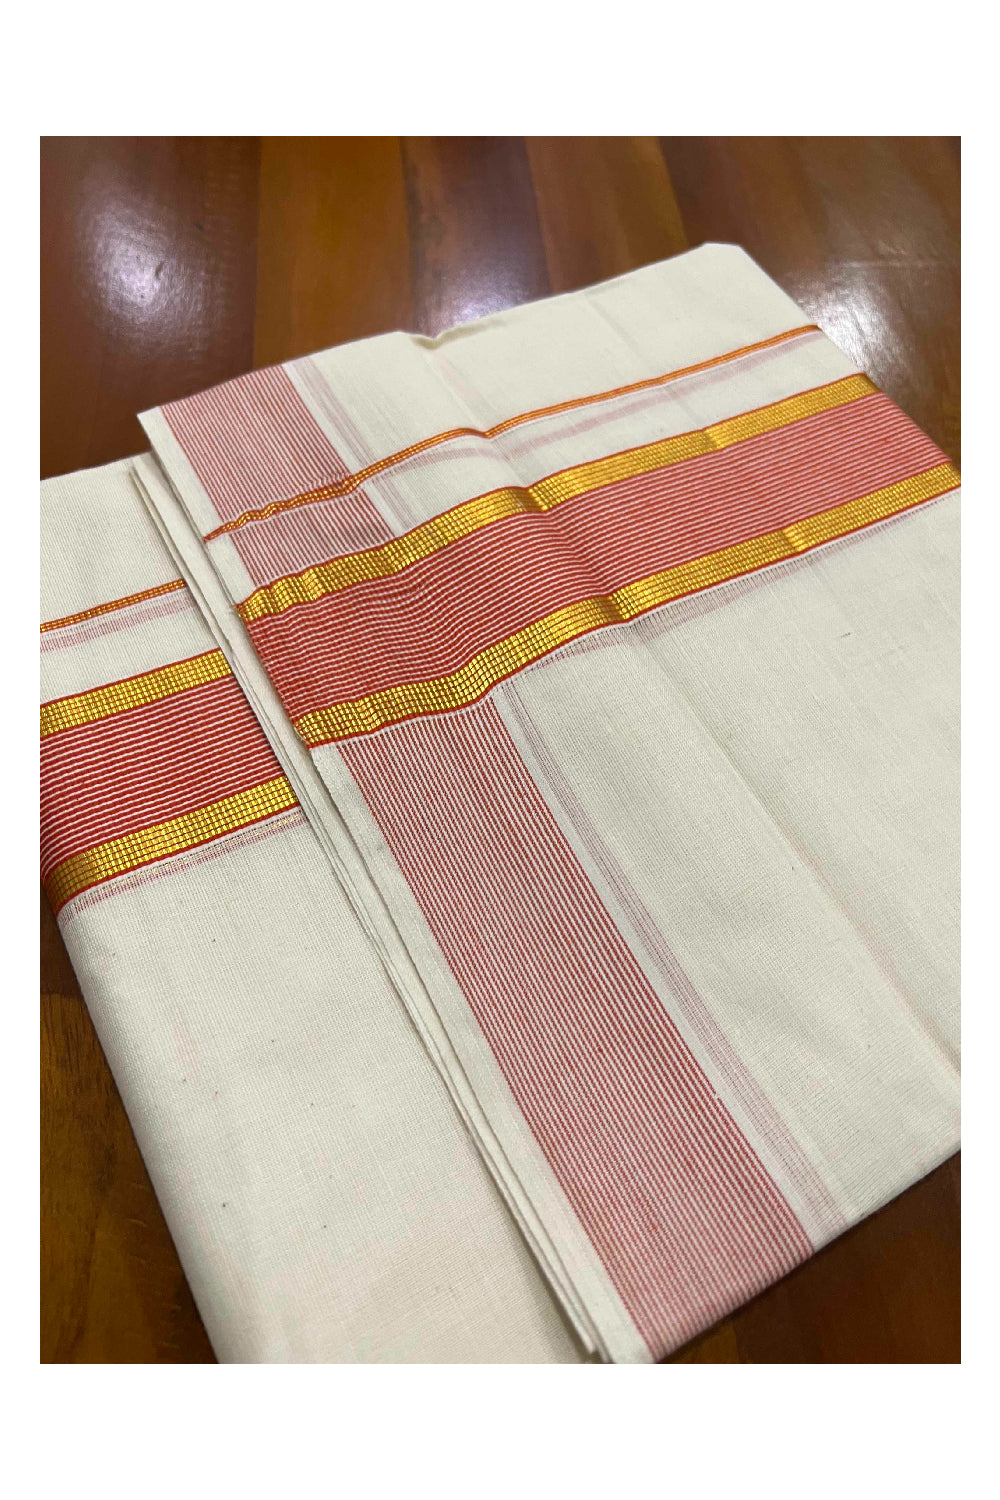 Off White Kerala Double Mundu with Red and Kasavu Border (South Indian Dhoti)